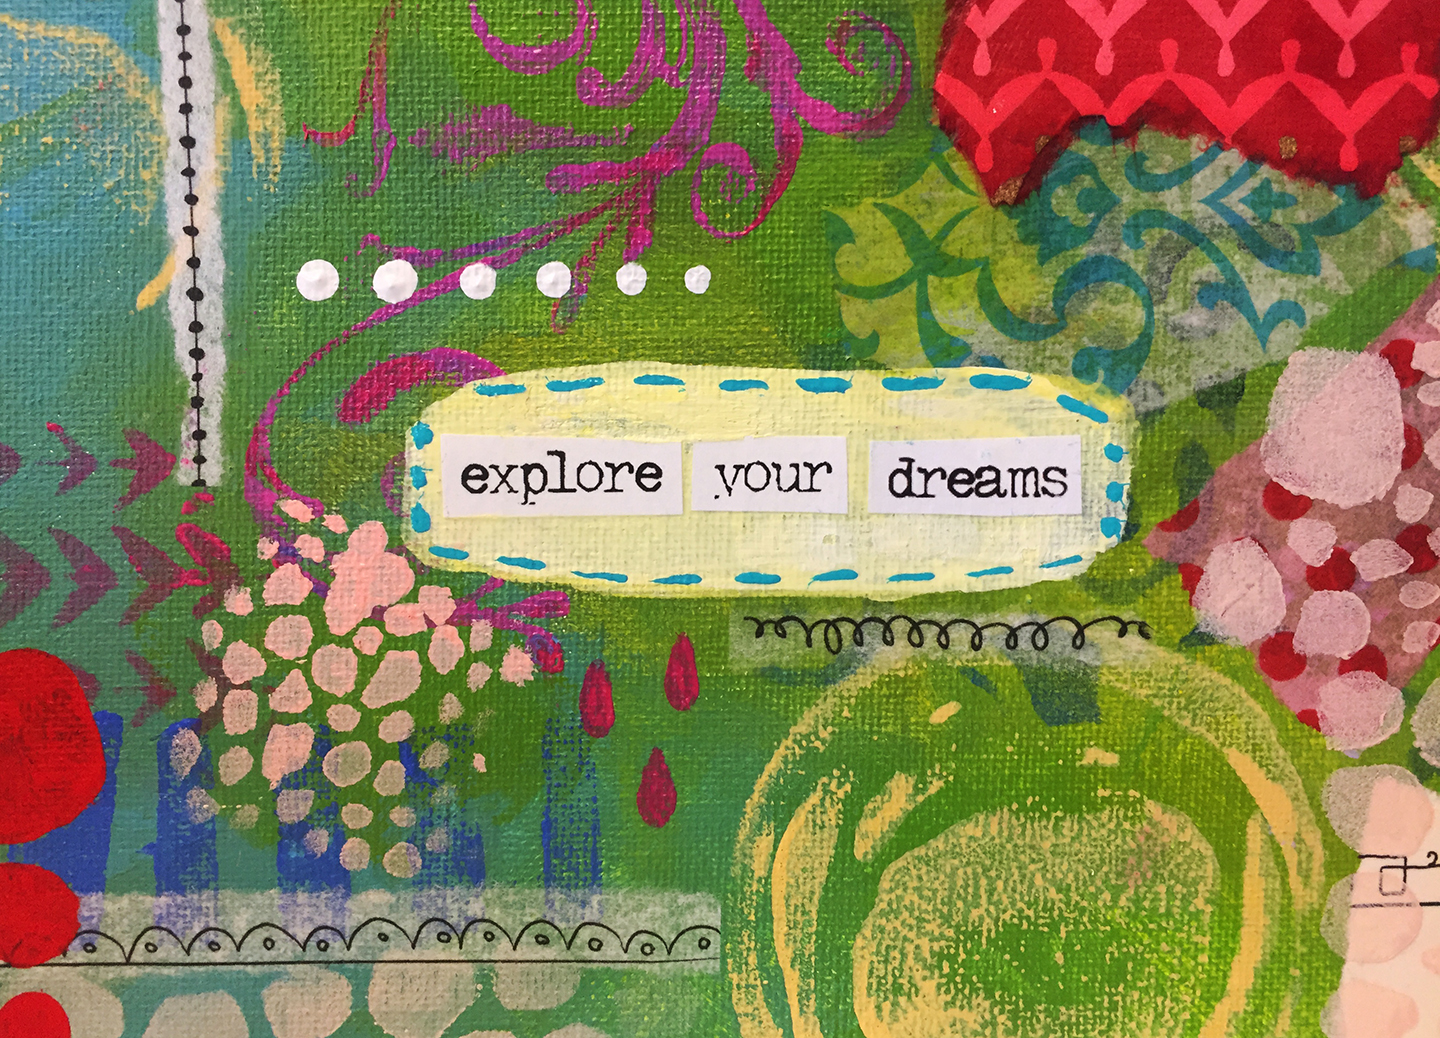 Affirmation made from mixed media